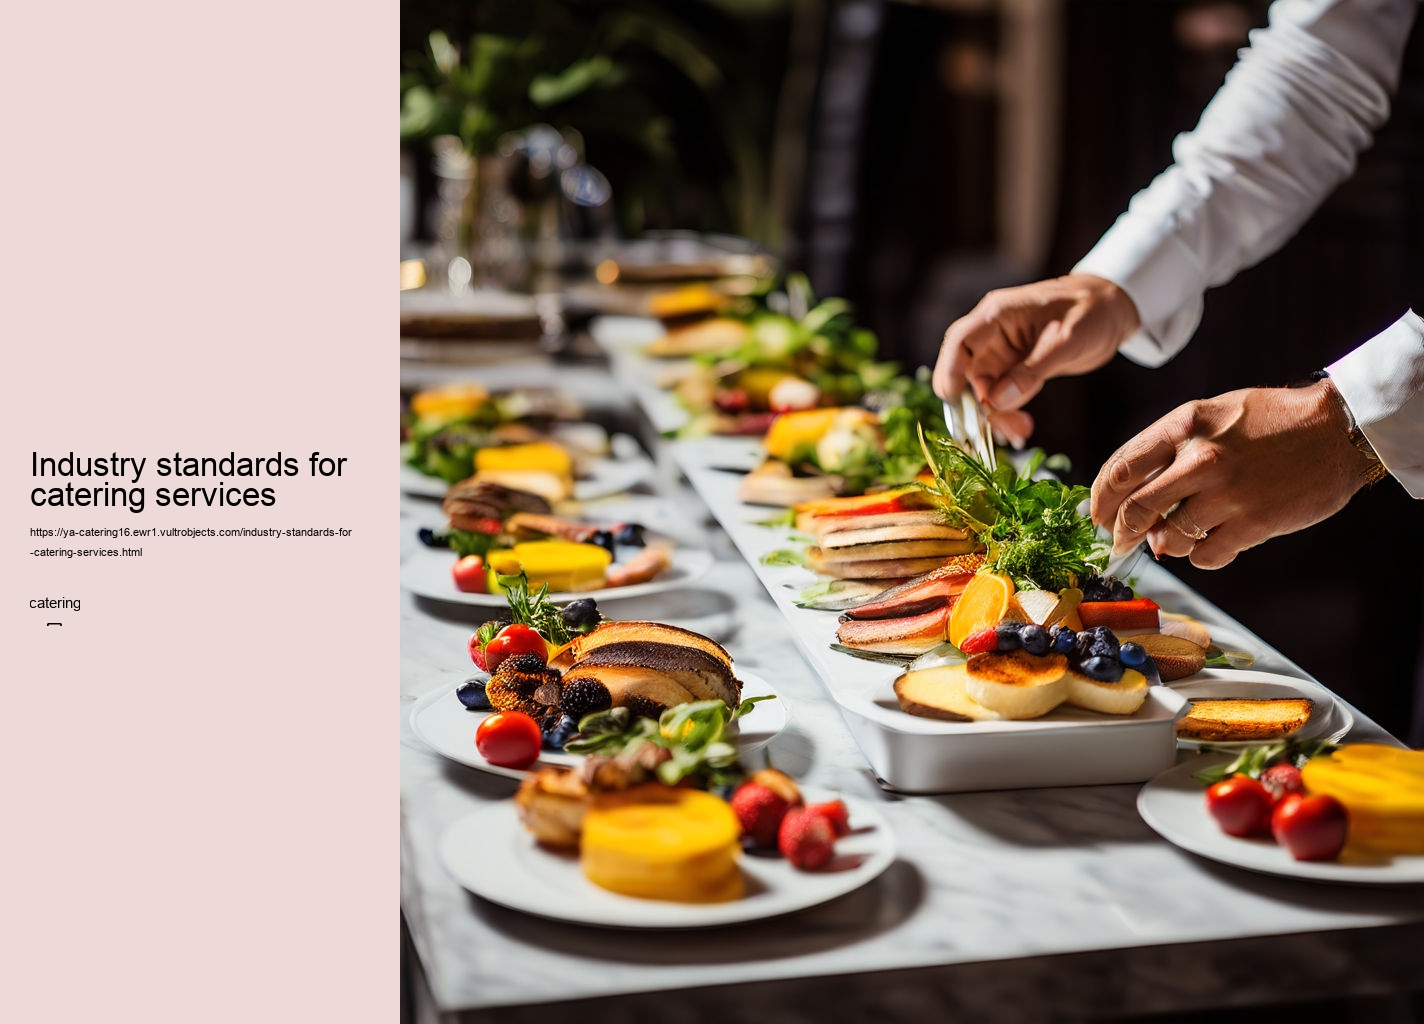 Industry standards for catering services